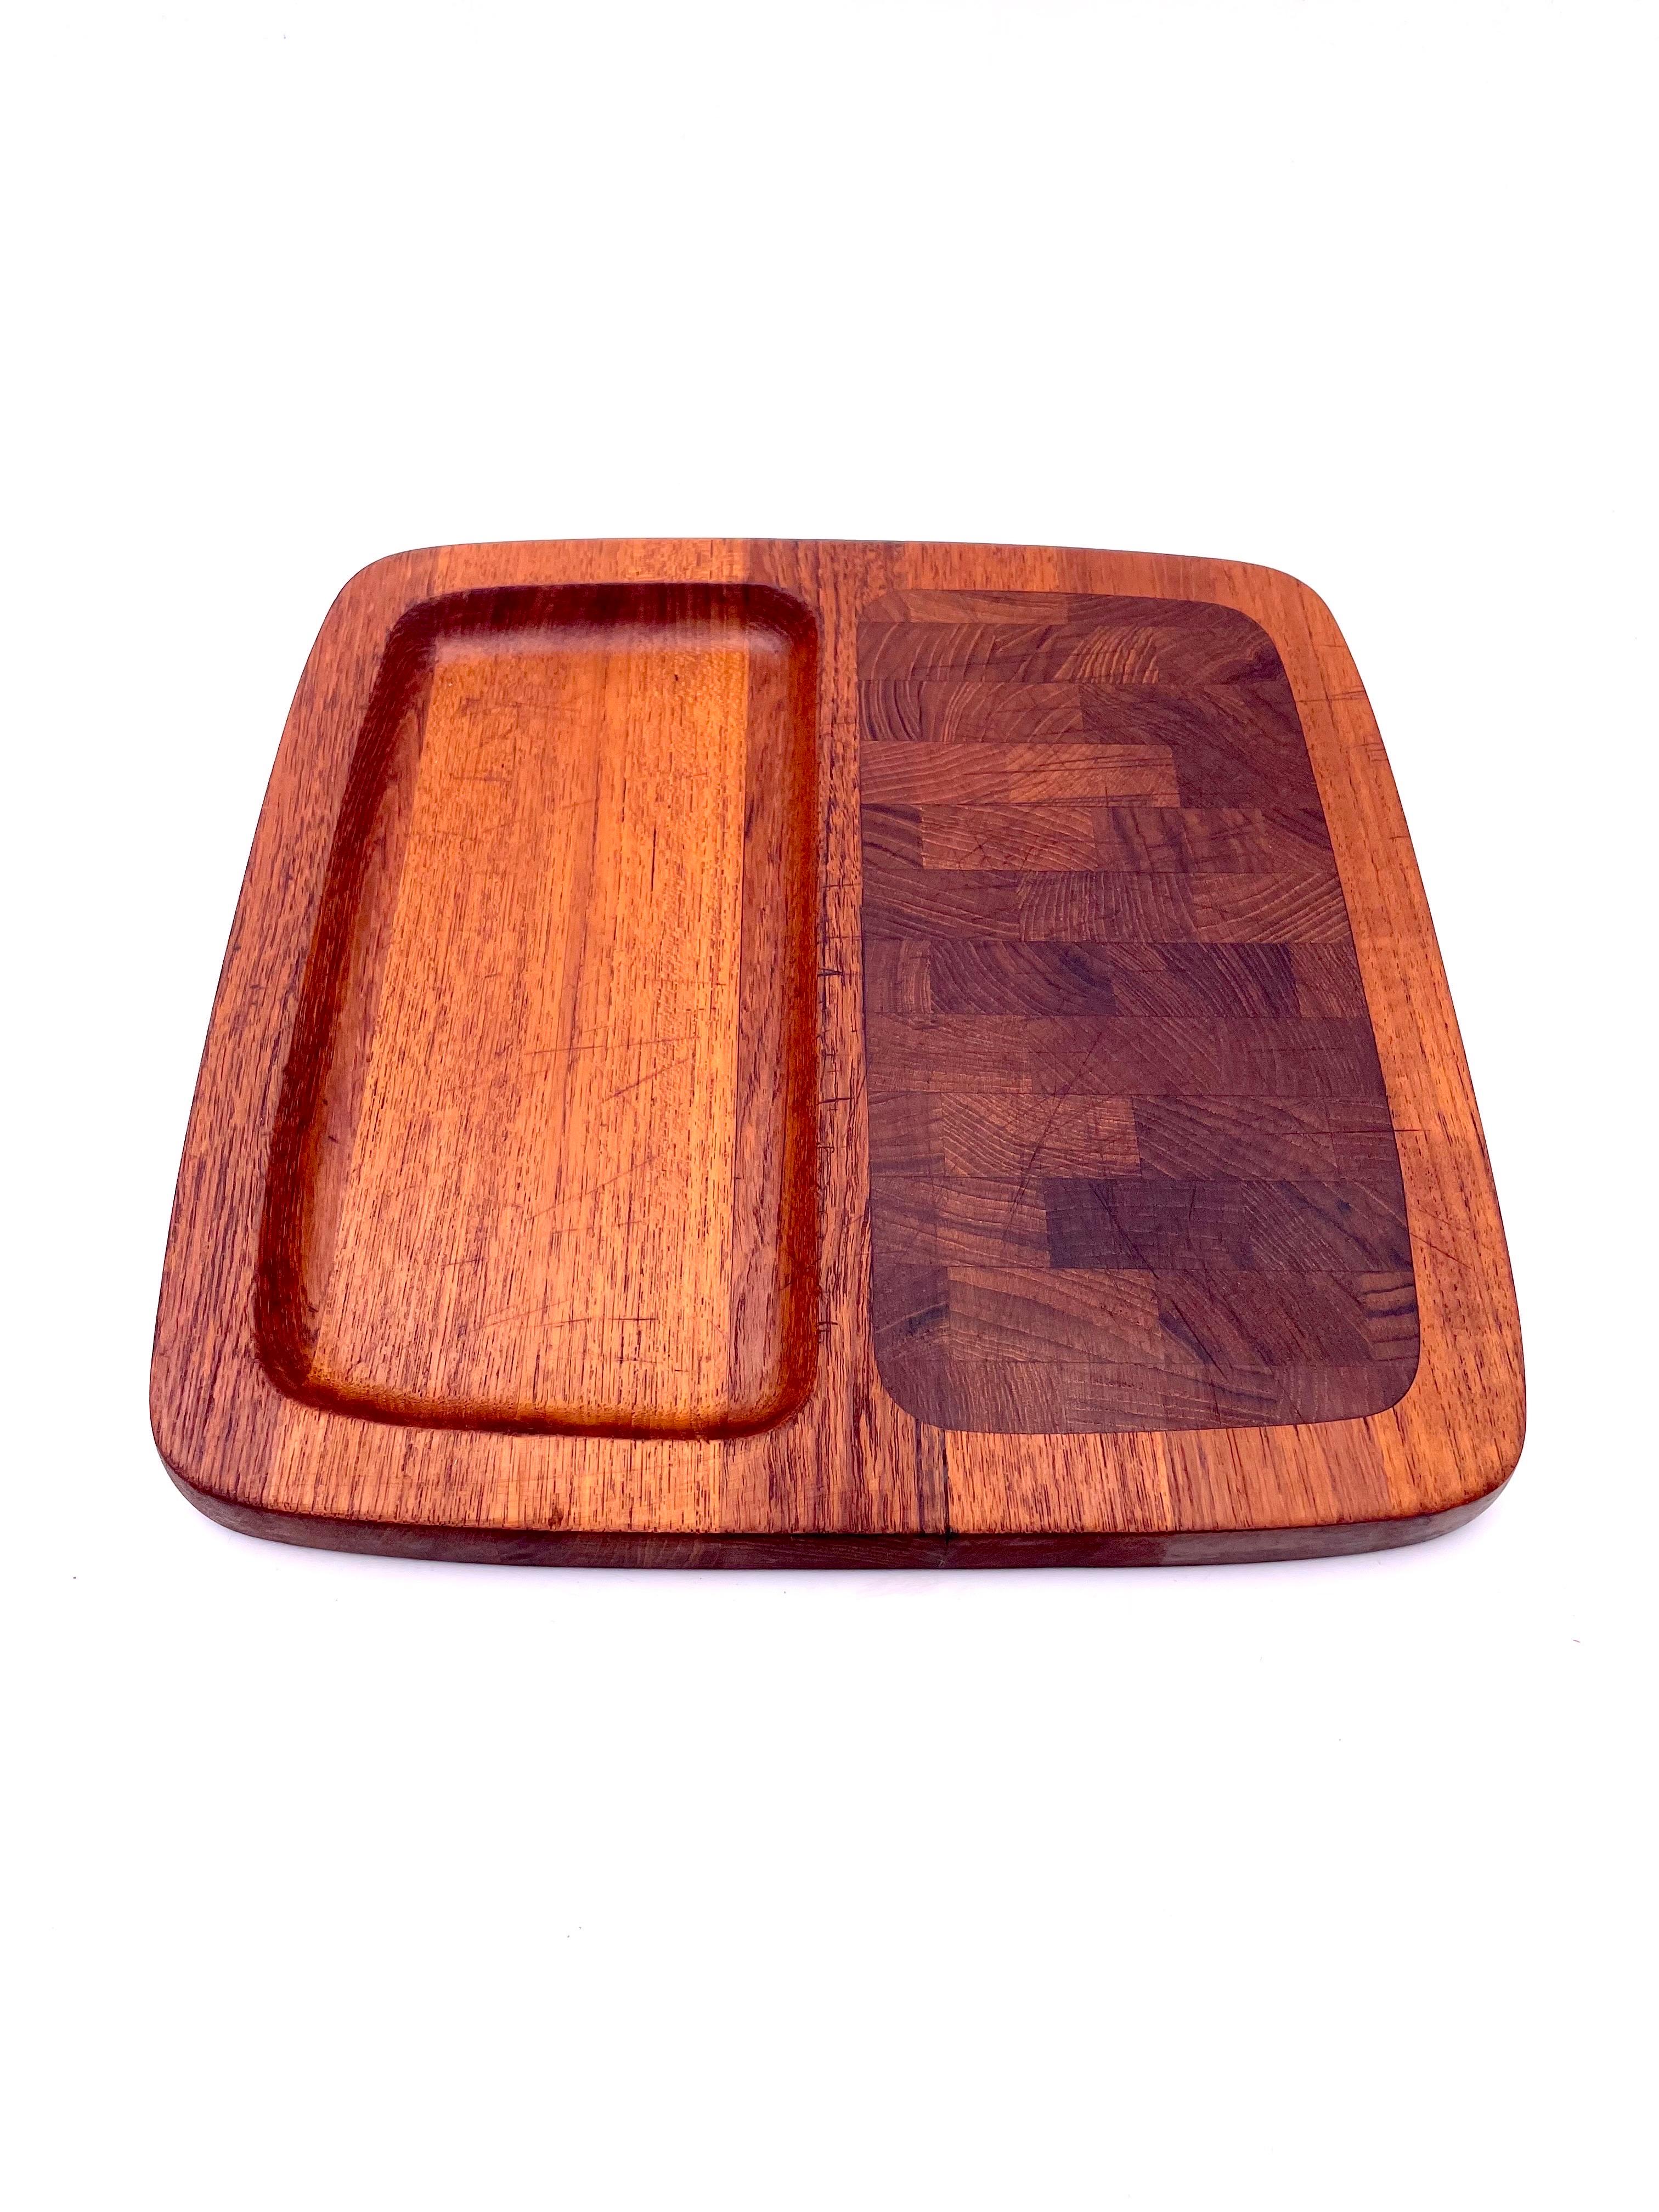 Scandinavian Modern Danish Modern Solid Teak Cheese and Crackers Tray by Dansk Quistgaard For Sale